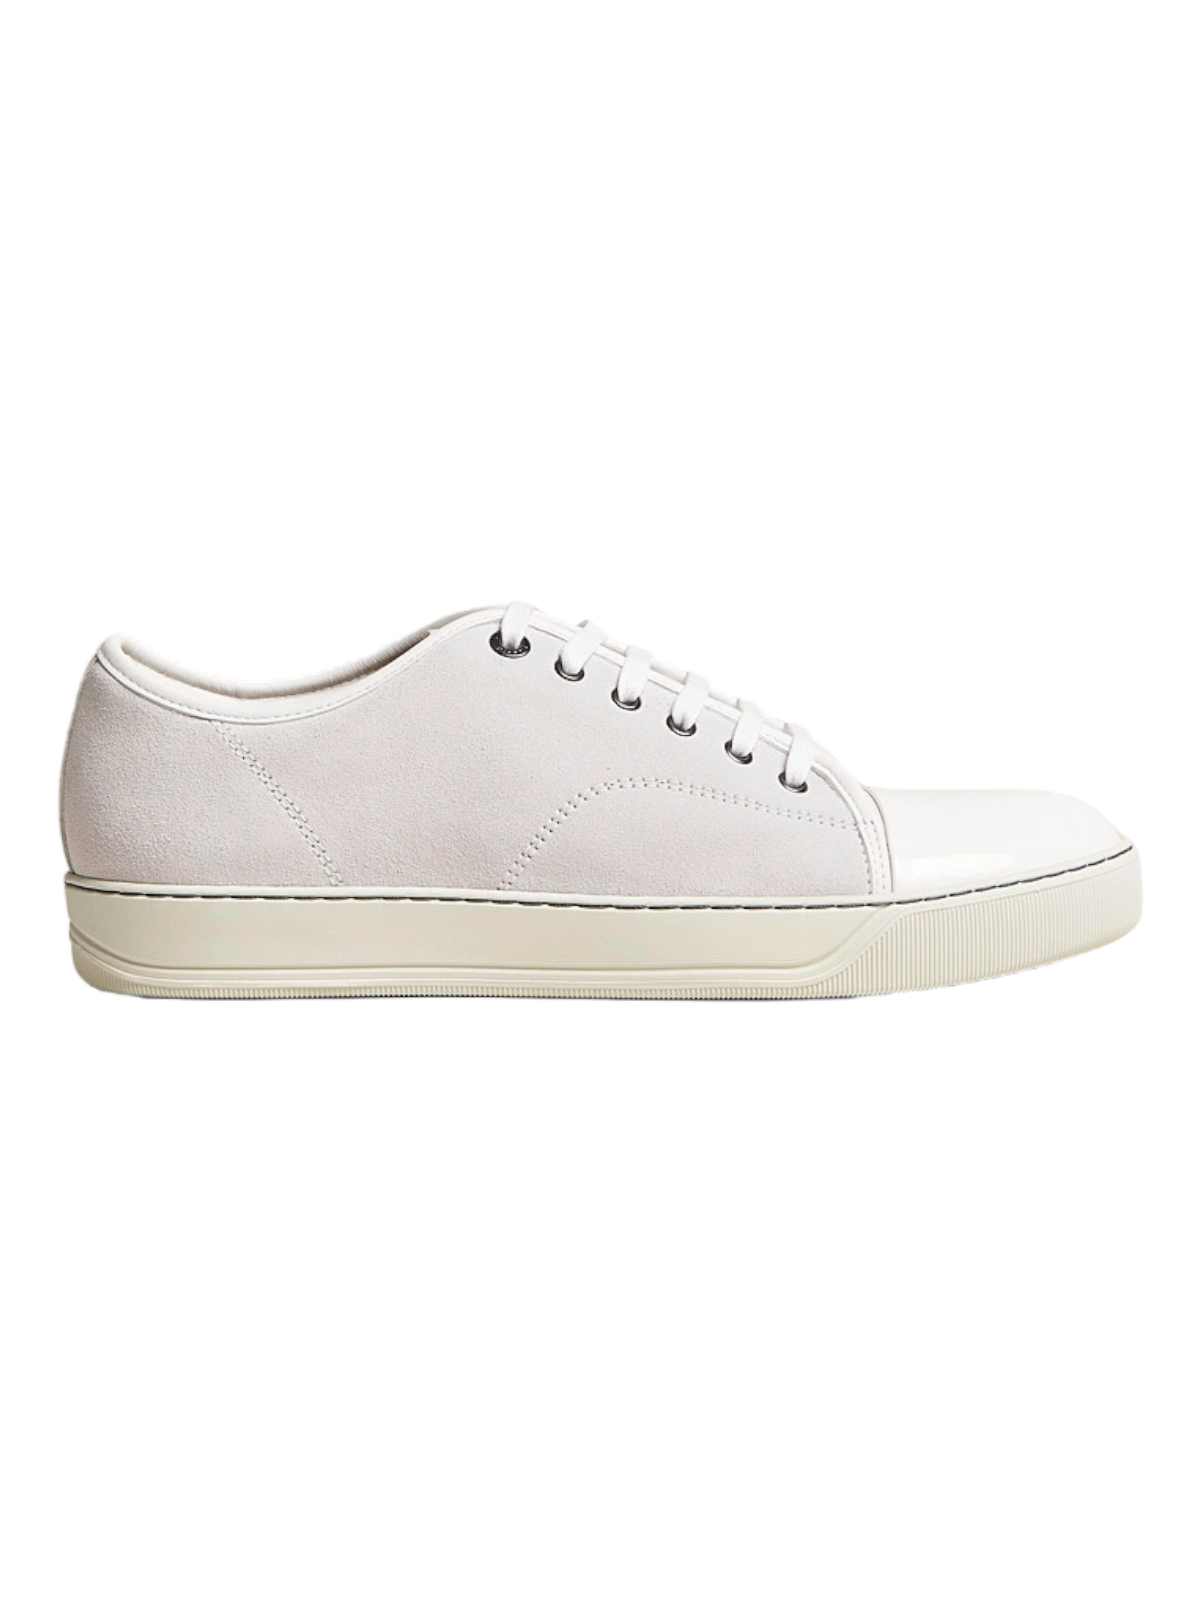 Lanvin DBB1 Suede & Leather Shiny Toe Cap Sneakers